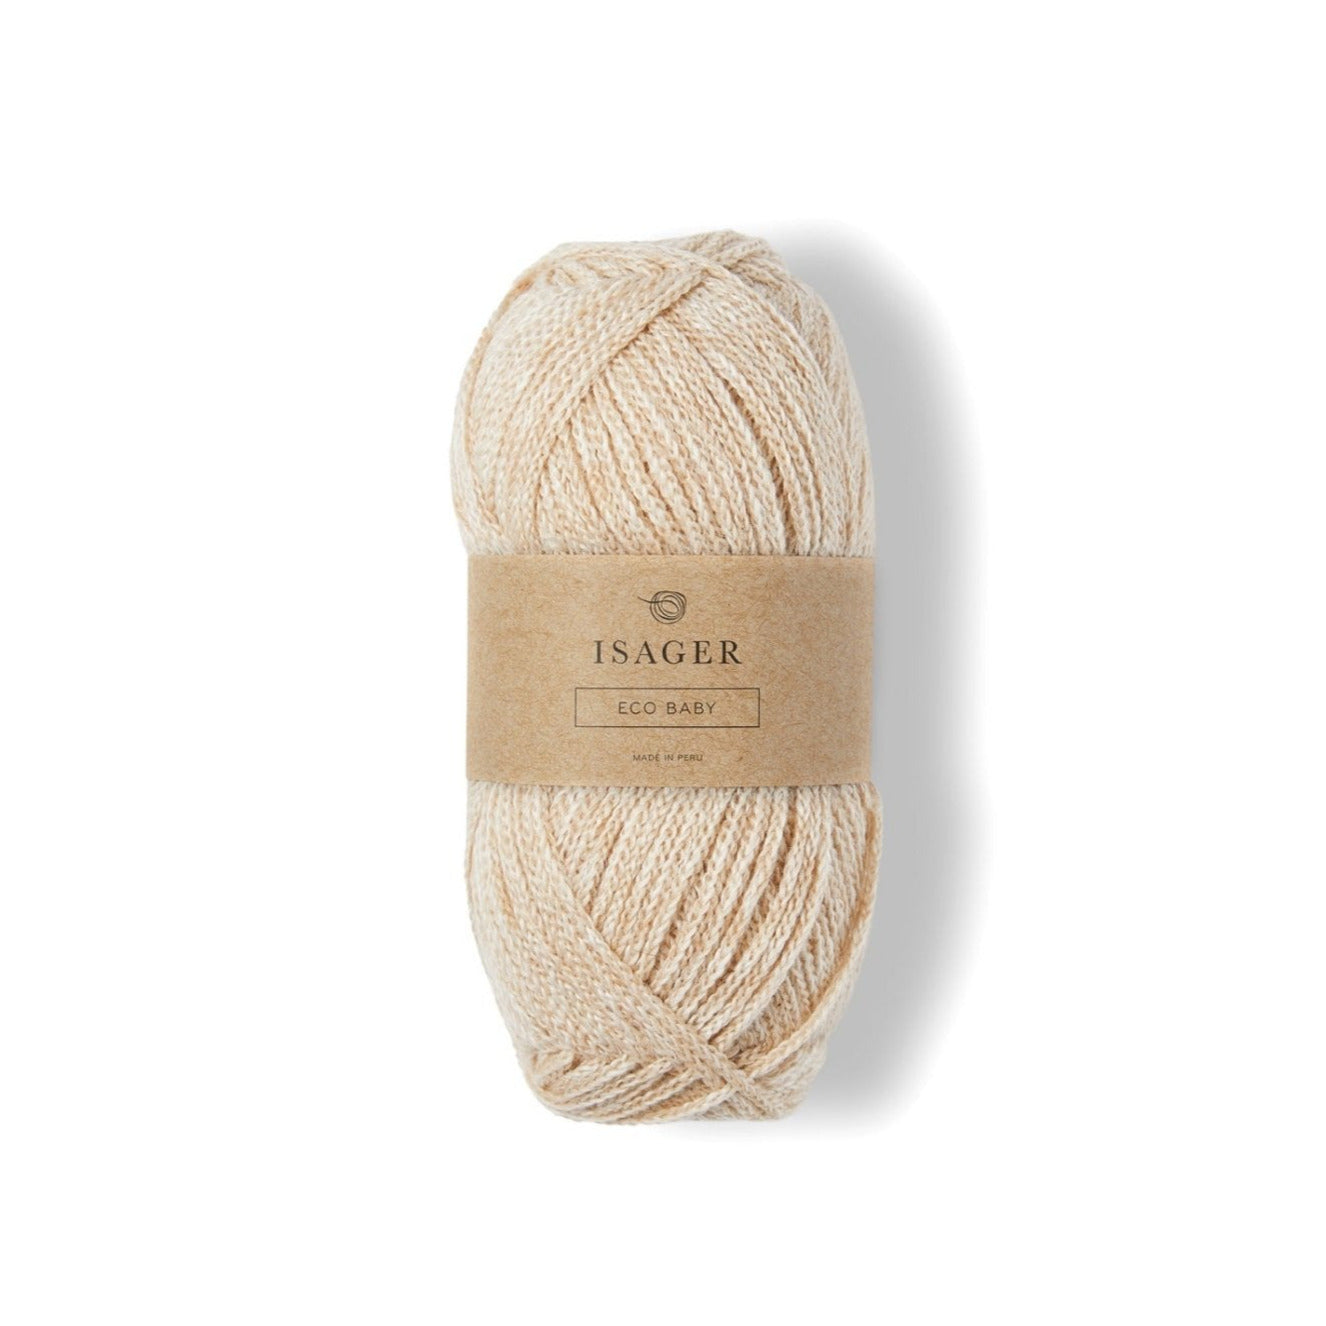 Isager Eco Baby - 7s - 5 Ply - Alpaca - The Little Yarn Store